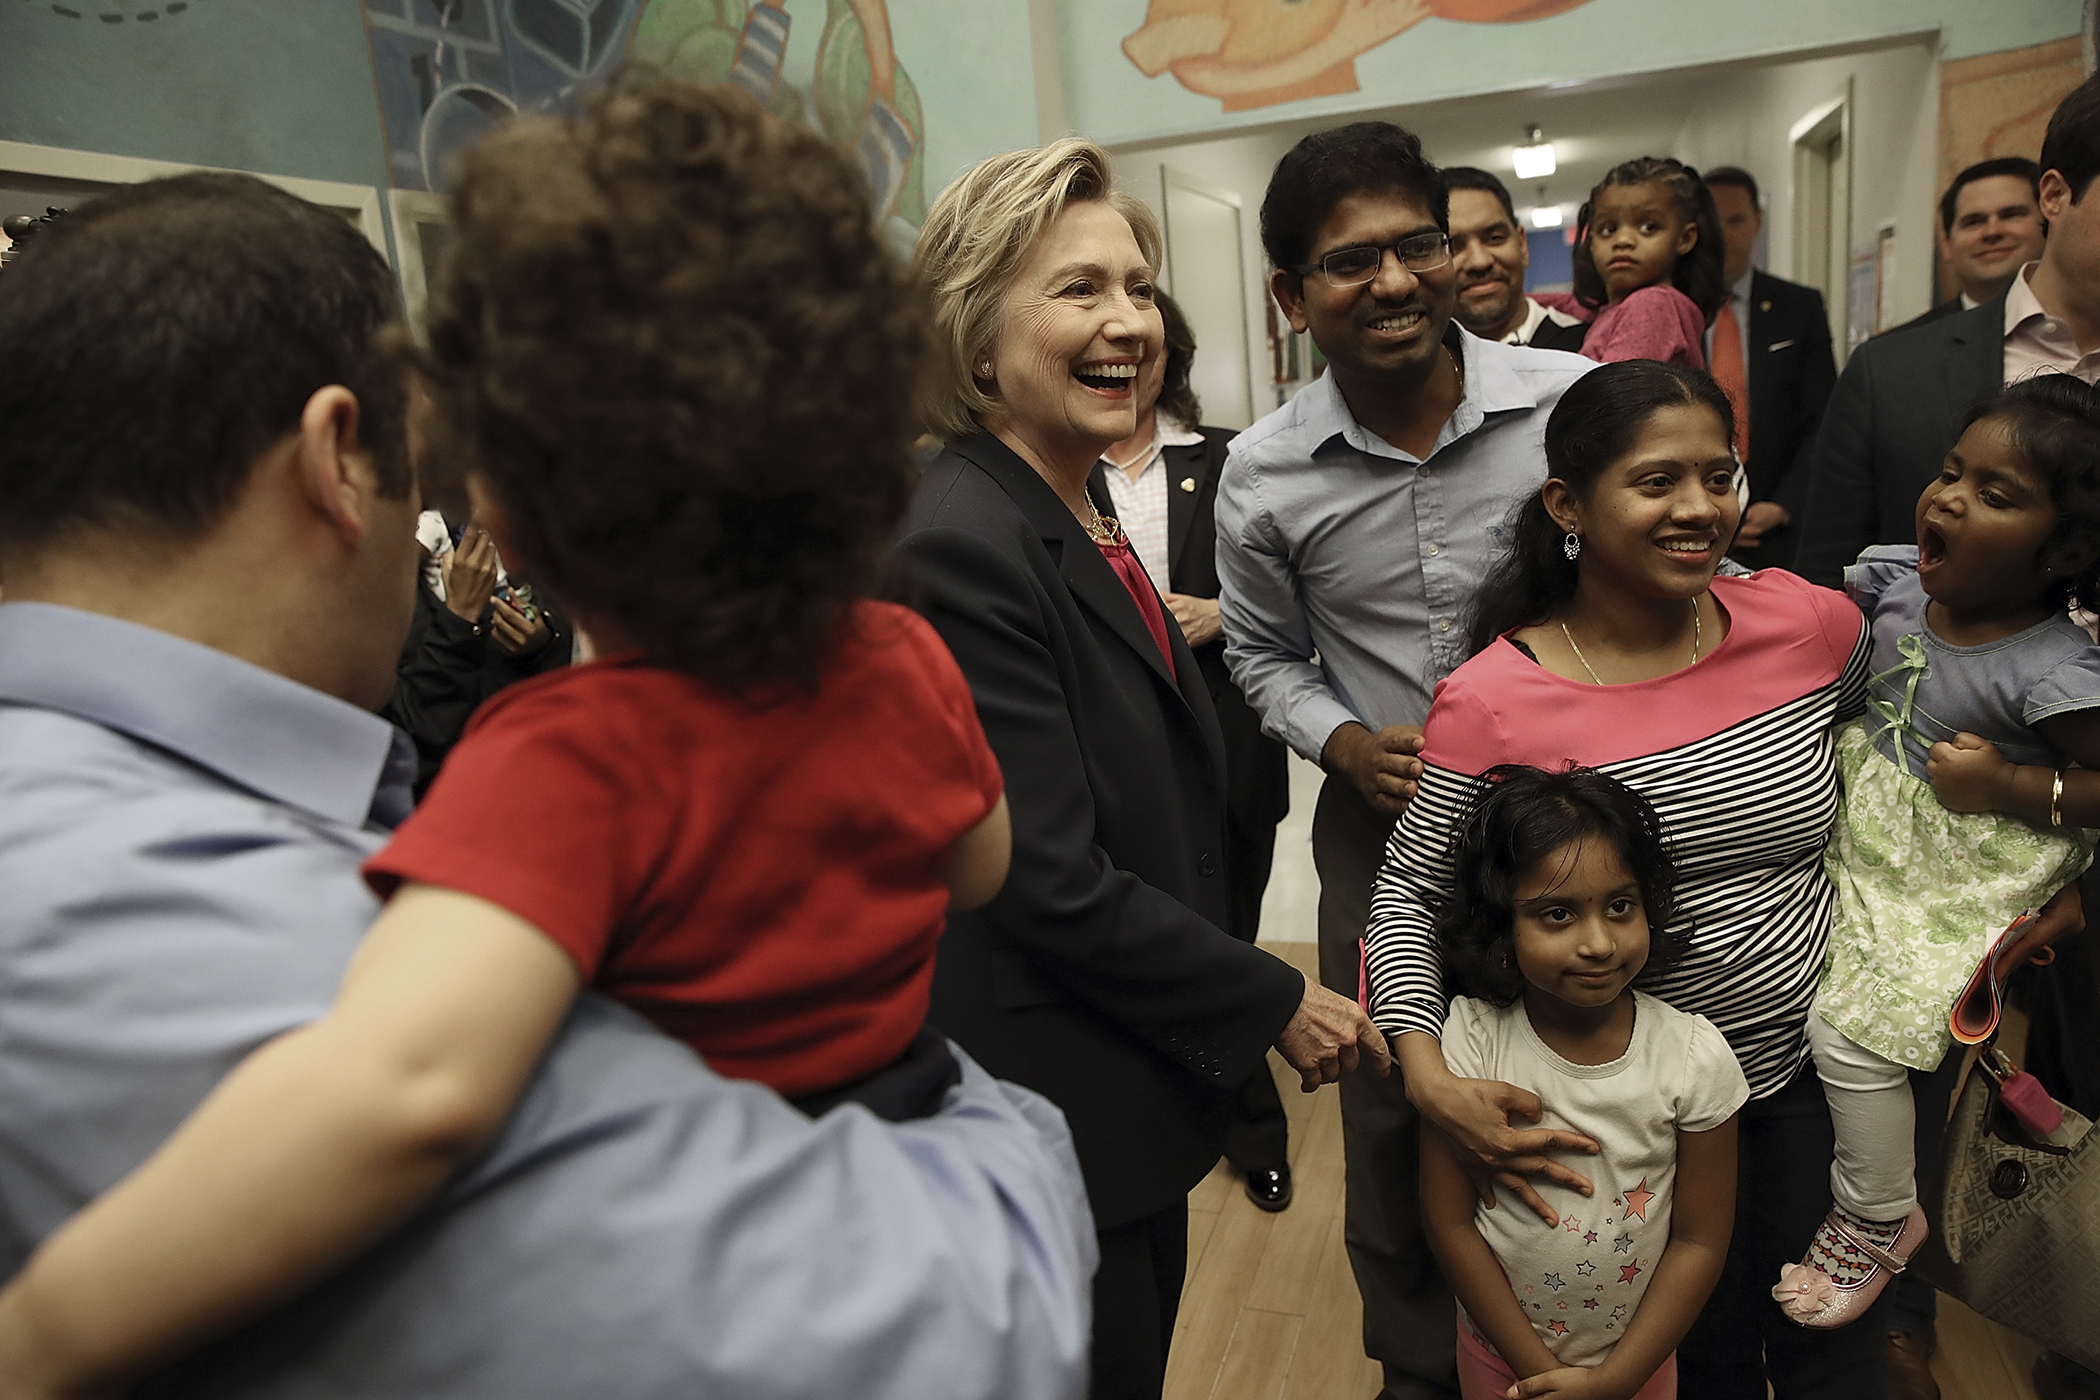 What You Should Know About Hillary Clinton's European-Style Child-Care Plan